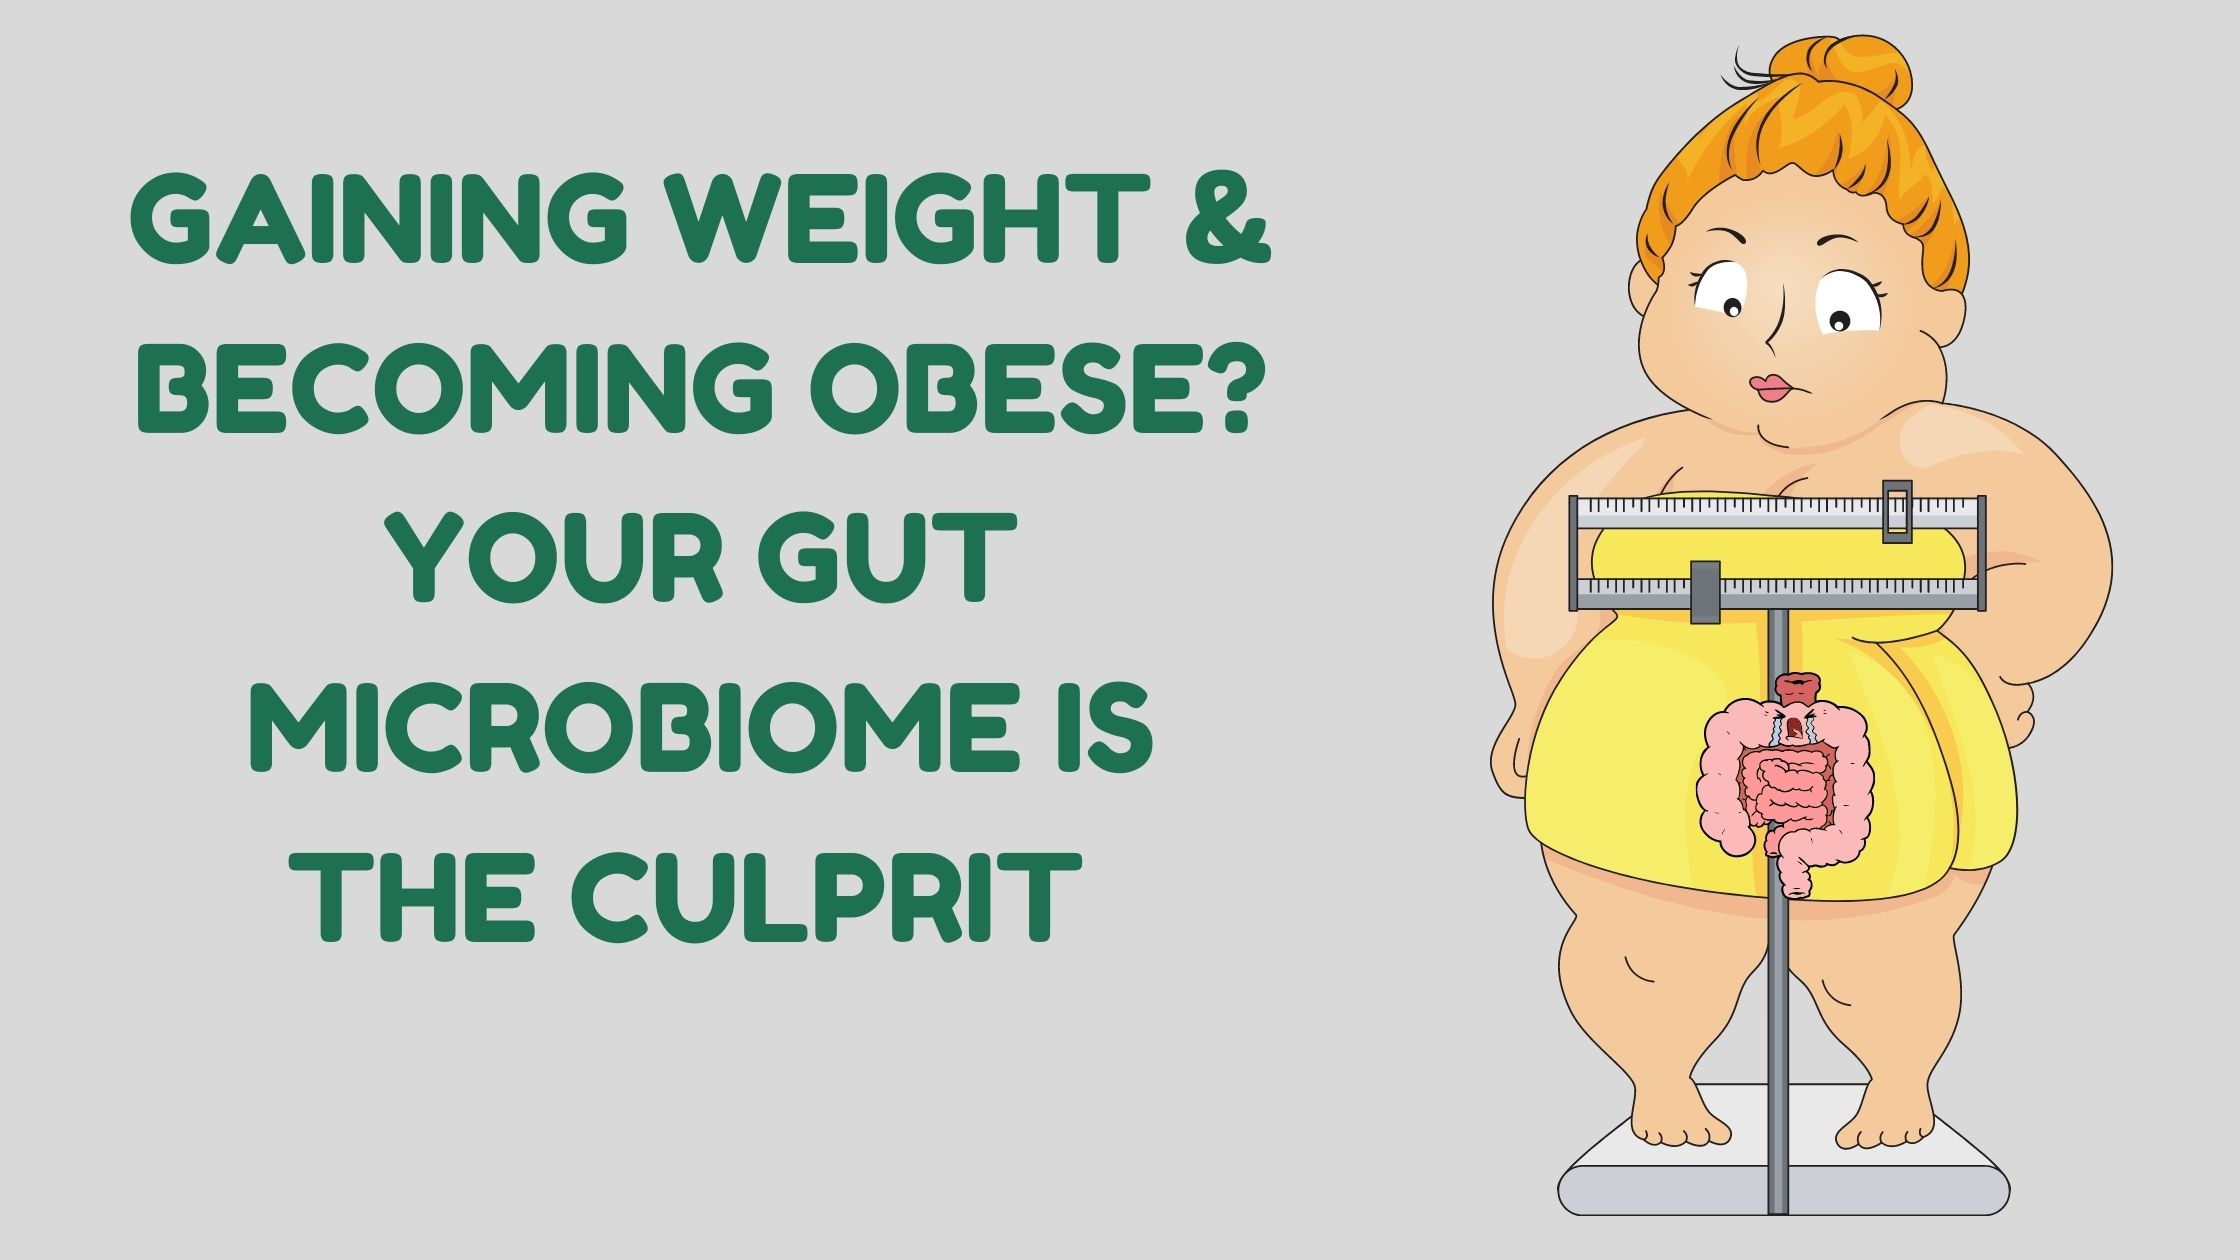 Gaining weight & becoming obese? Your gut microbiome is the culprit